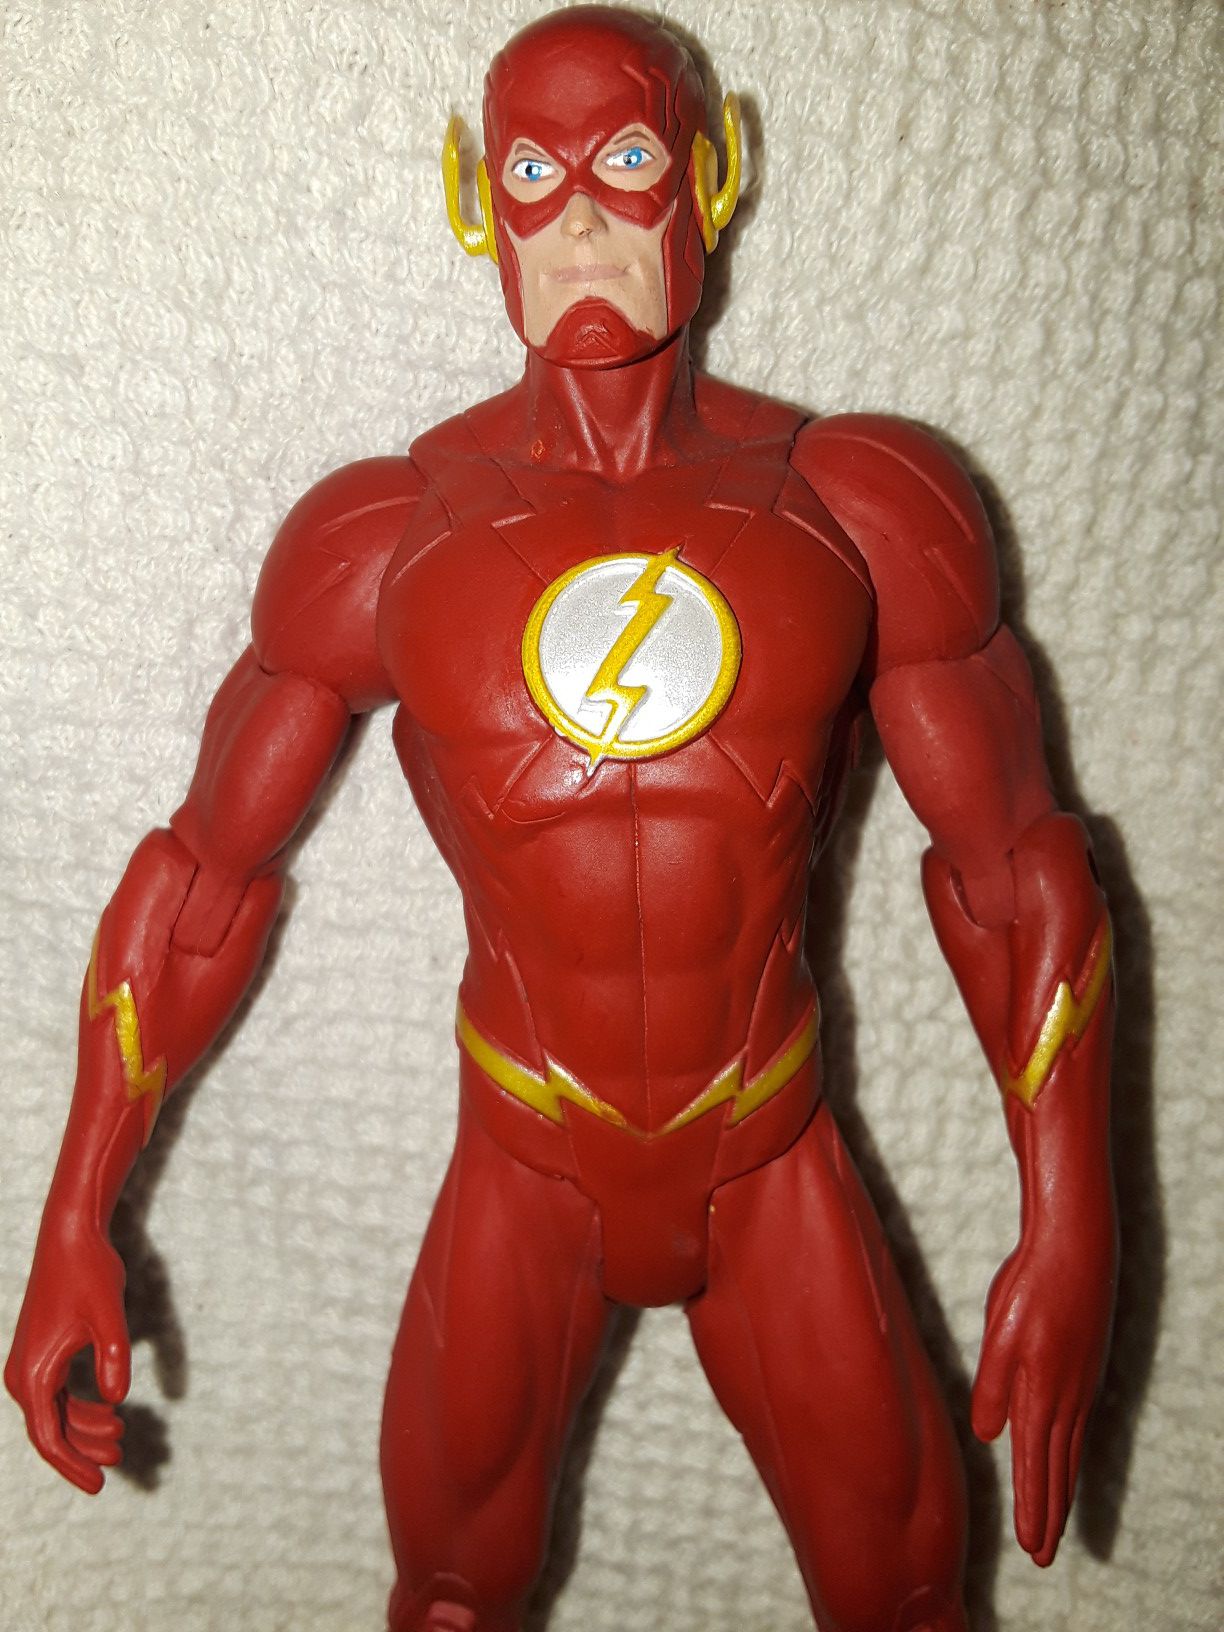 DC DIRECT JUSTICE LEAGUE NEW 52 COMIC SERIES - THE FLASH 7" FIGURE - ASQ6 DC Collectibles 52 Flash Figure